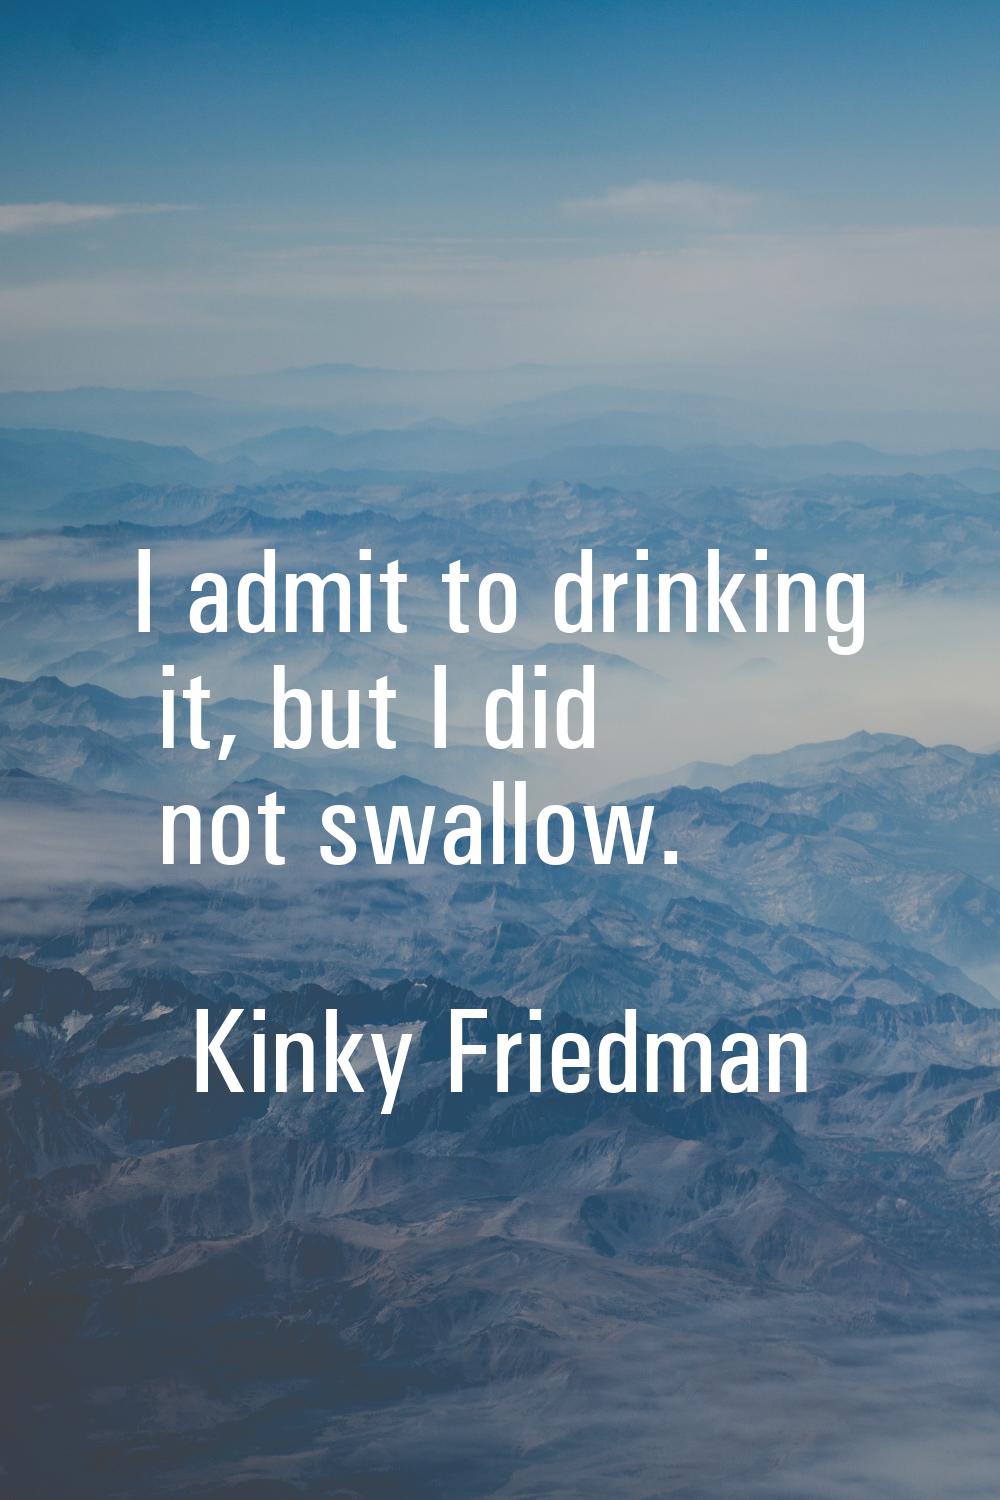 I admit to drinking it, but I did not swallow.